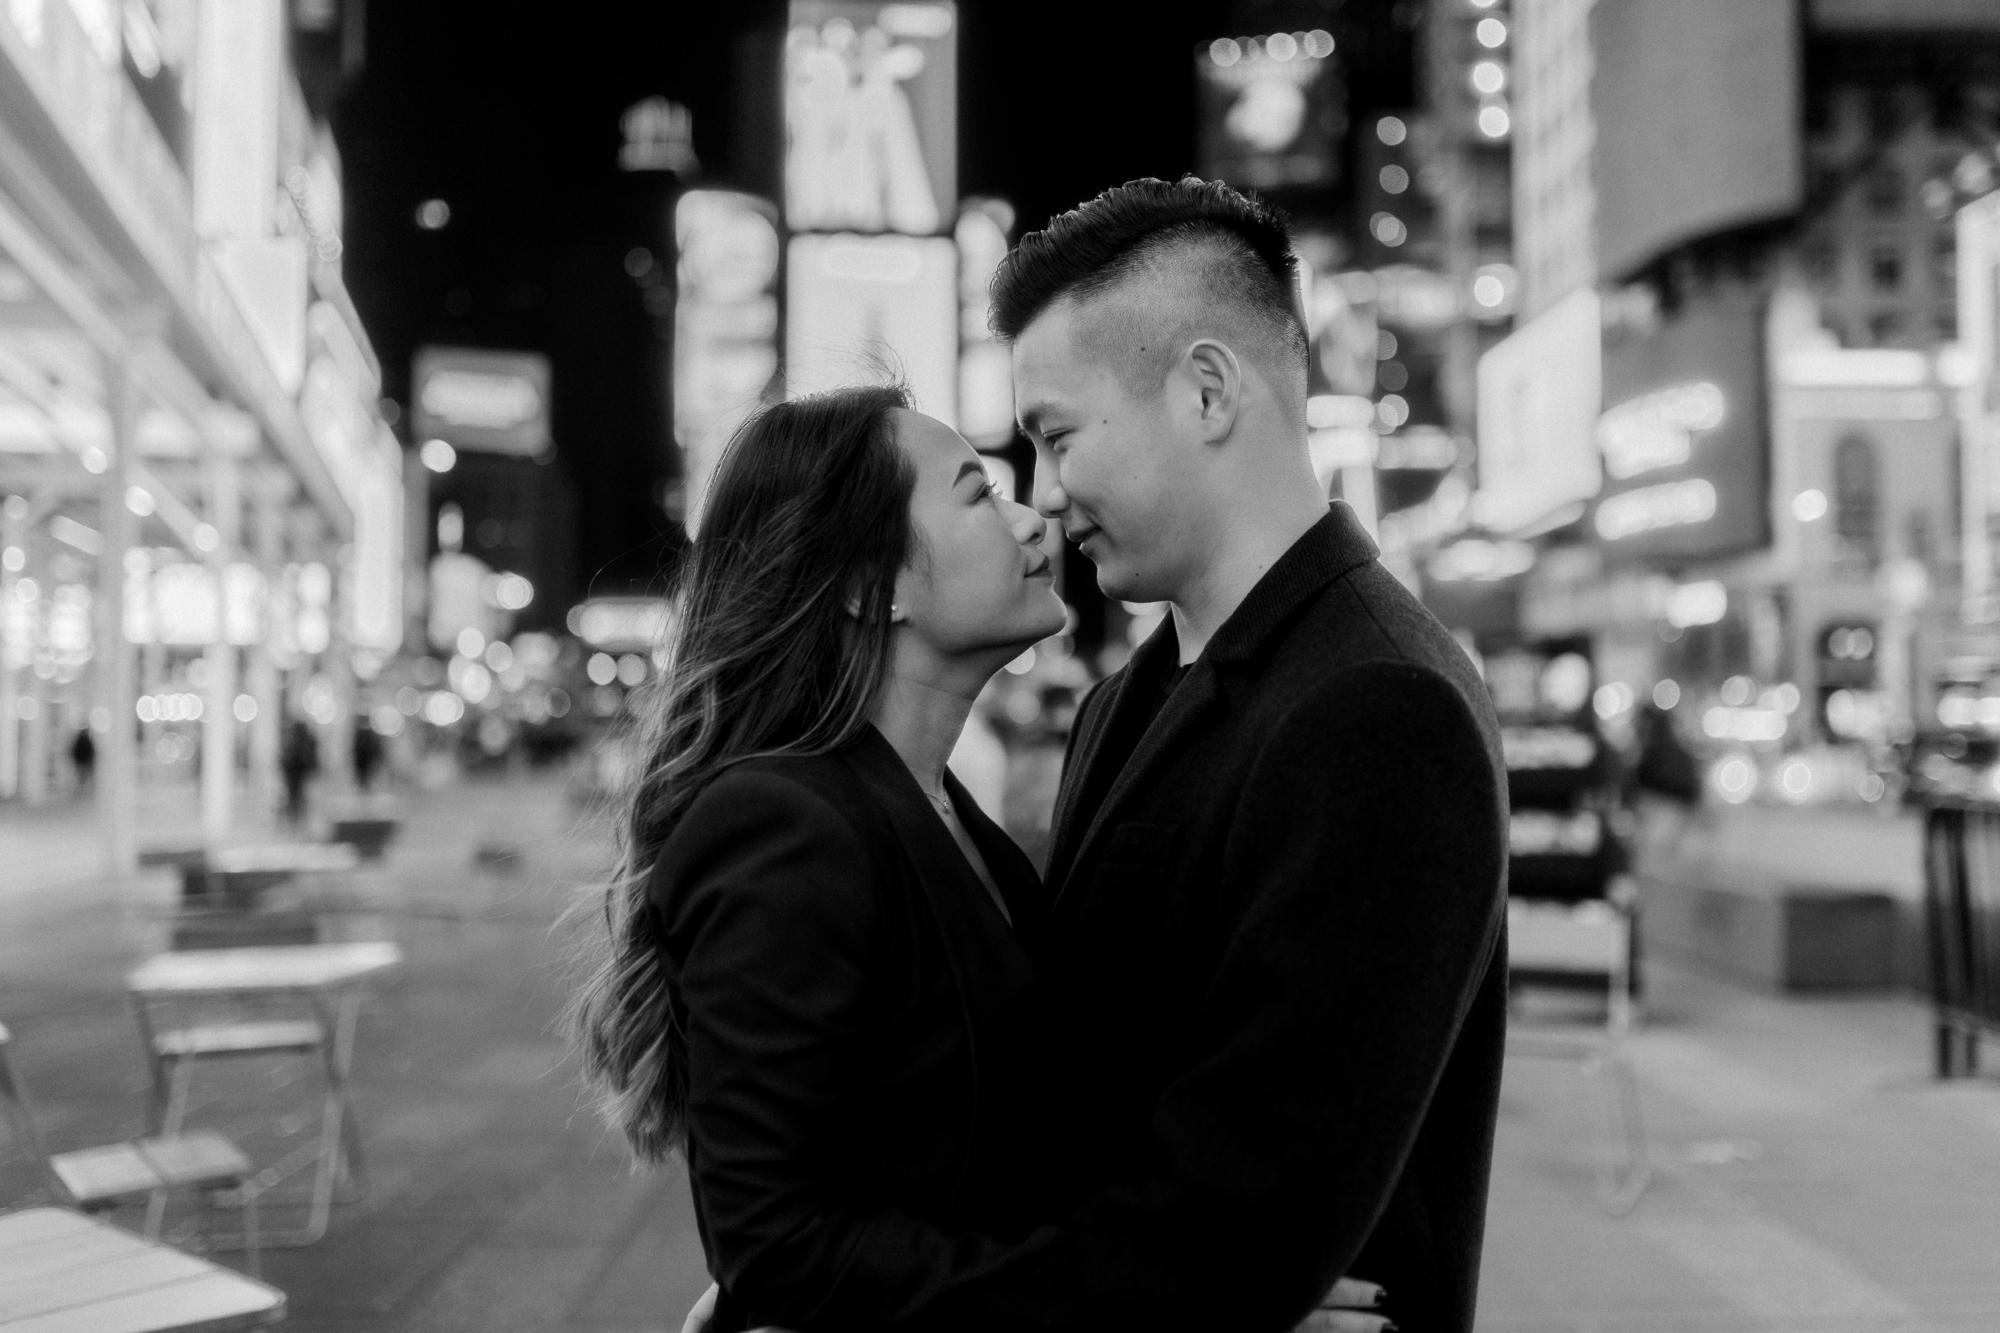 Black and White Nighttime Winter Engagement Photos in New York's Iconic Times Square